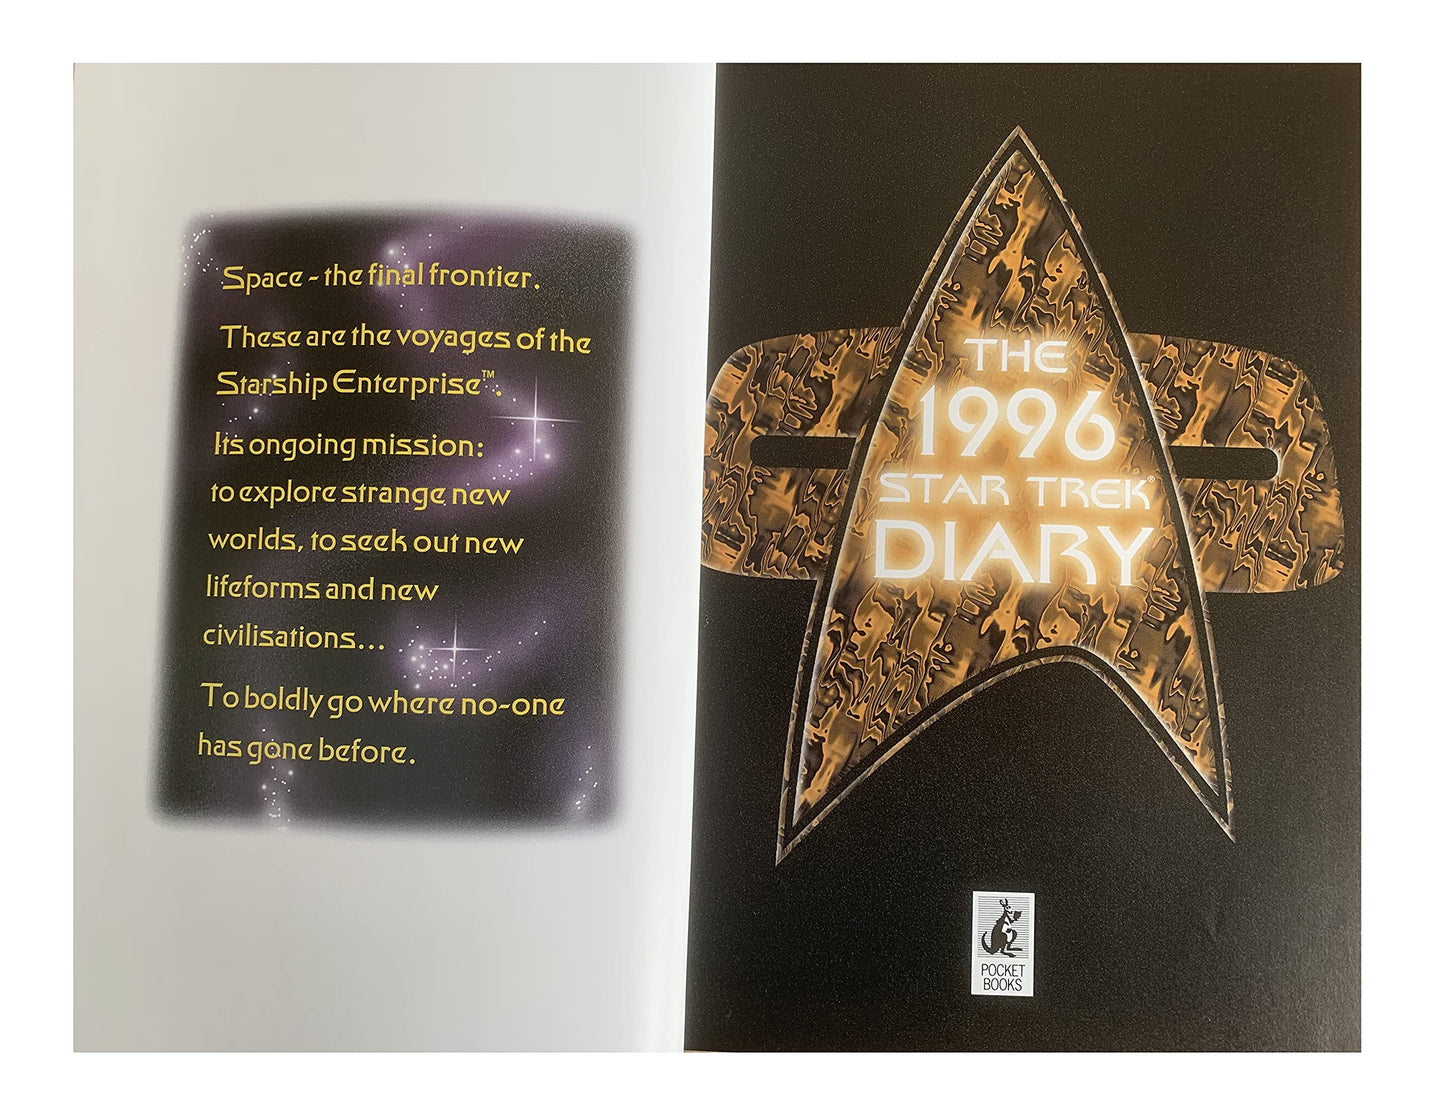 Vintage The Star Trek 1996 Diary - Containing over 60 Stunning Photographs From The Entire Star Trek Universe - Unsold Shop Stock